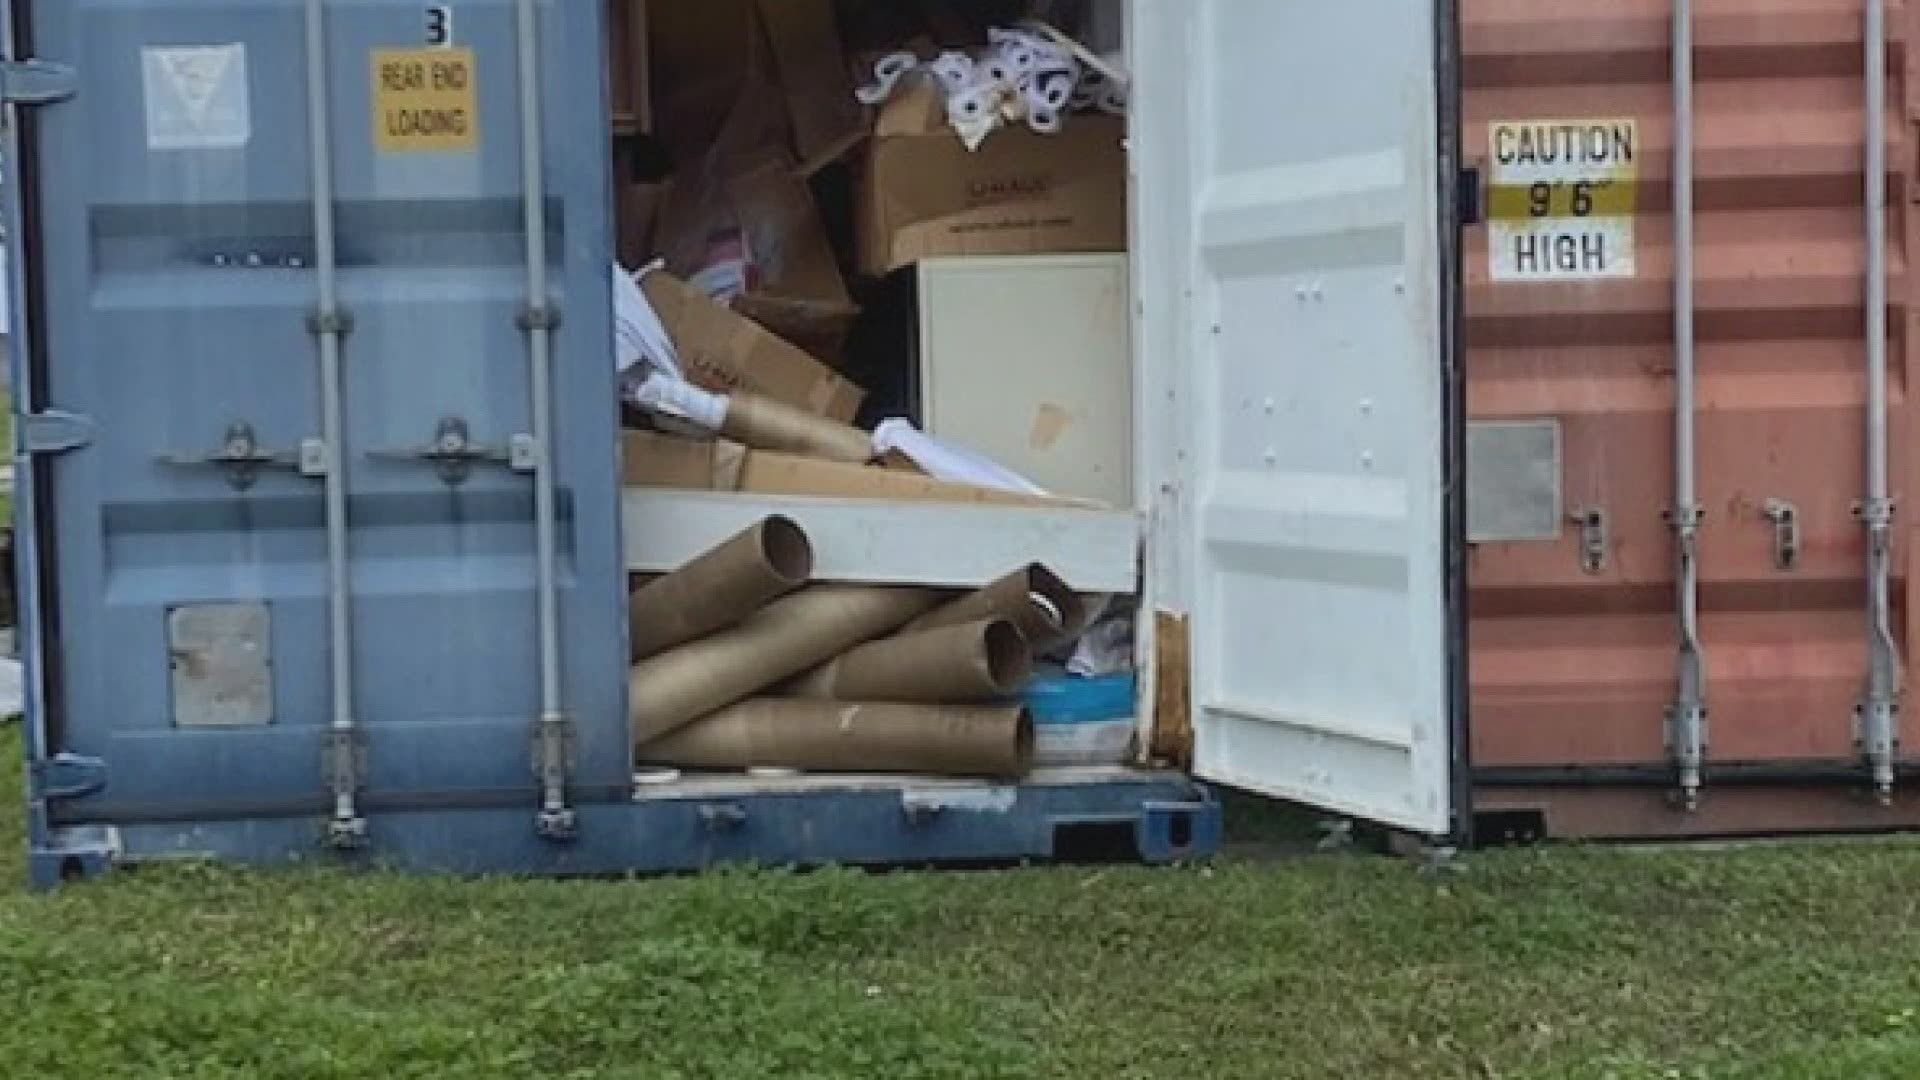 Several storage bins on a property in the 9th Ward are discovered to be full of documents containing personal information.